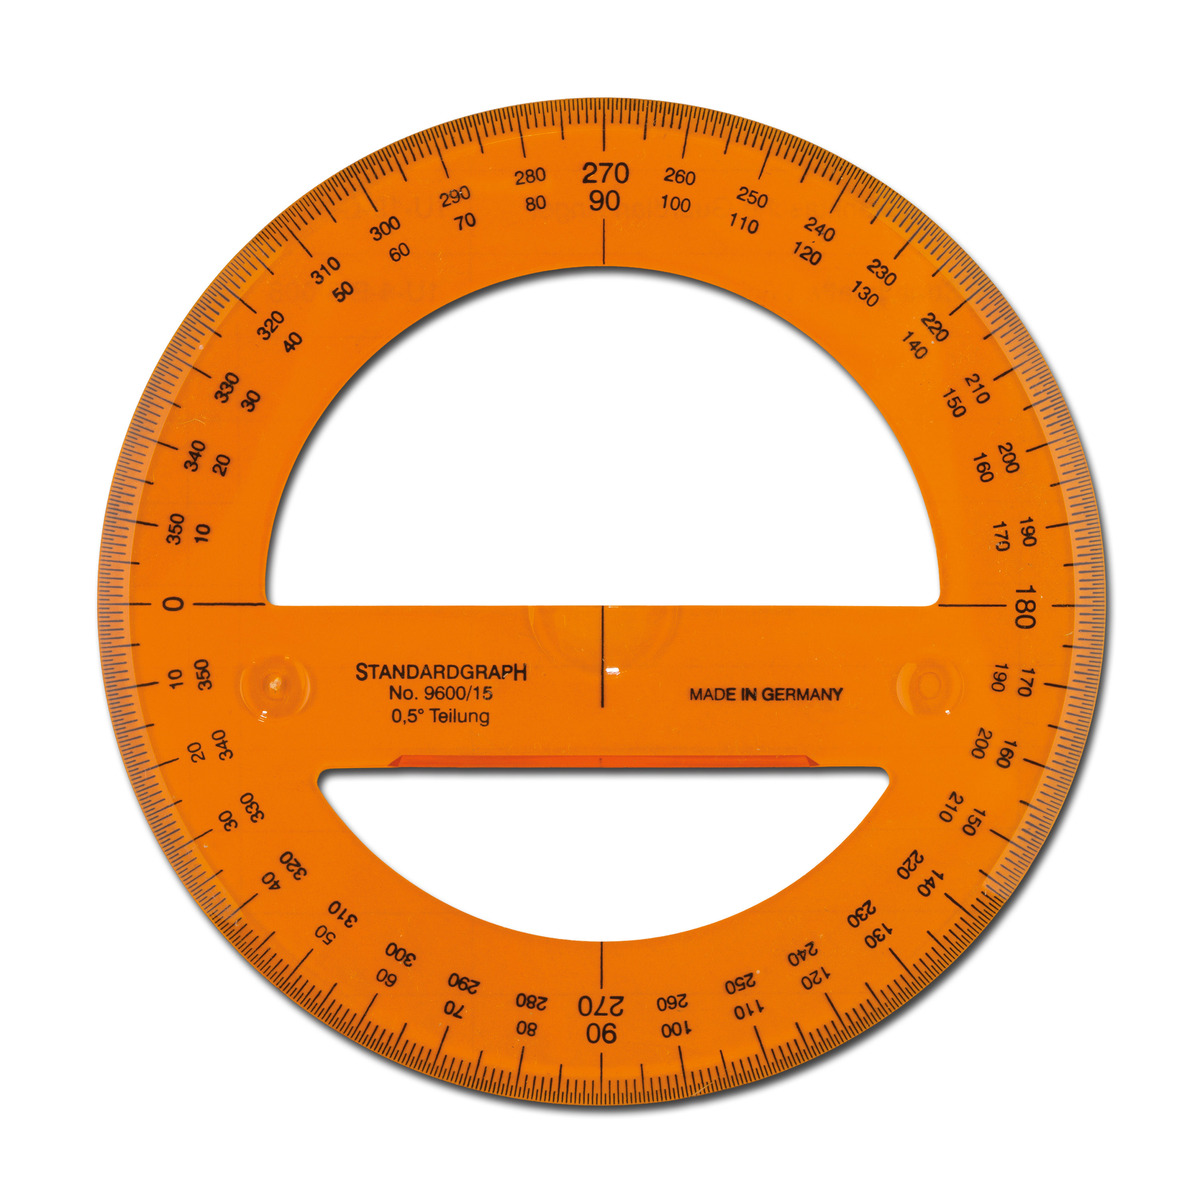 full circle protractor template printable